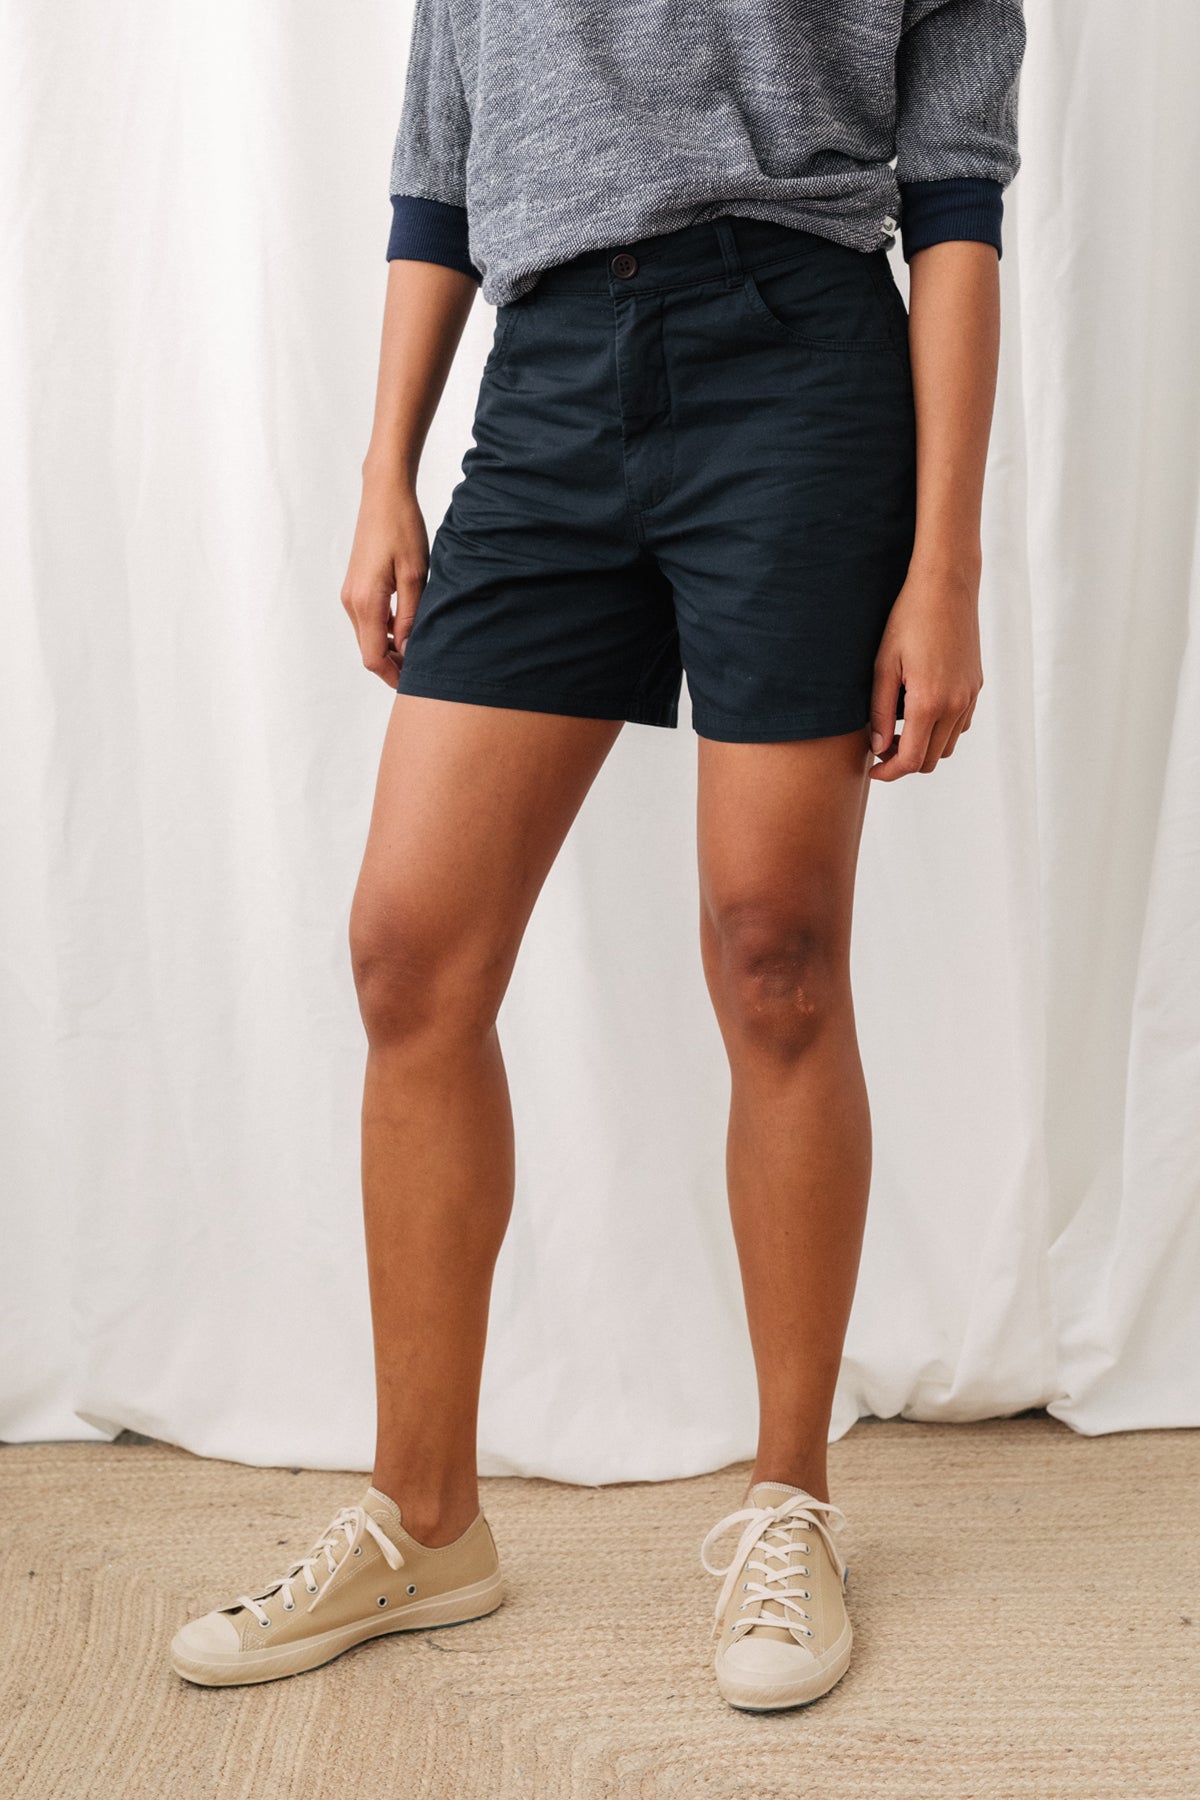 sustainable blue shorts for women